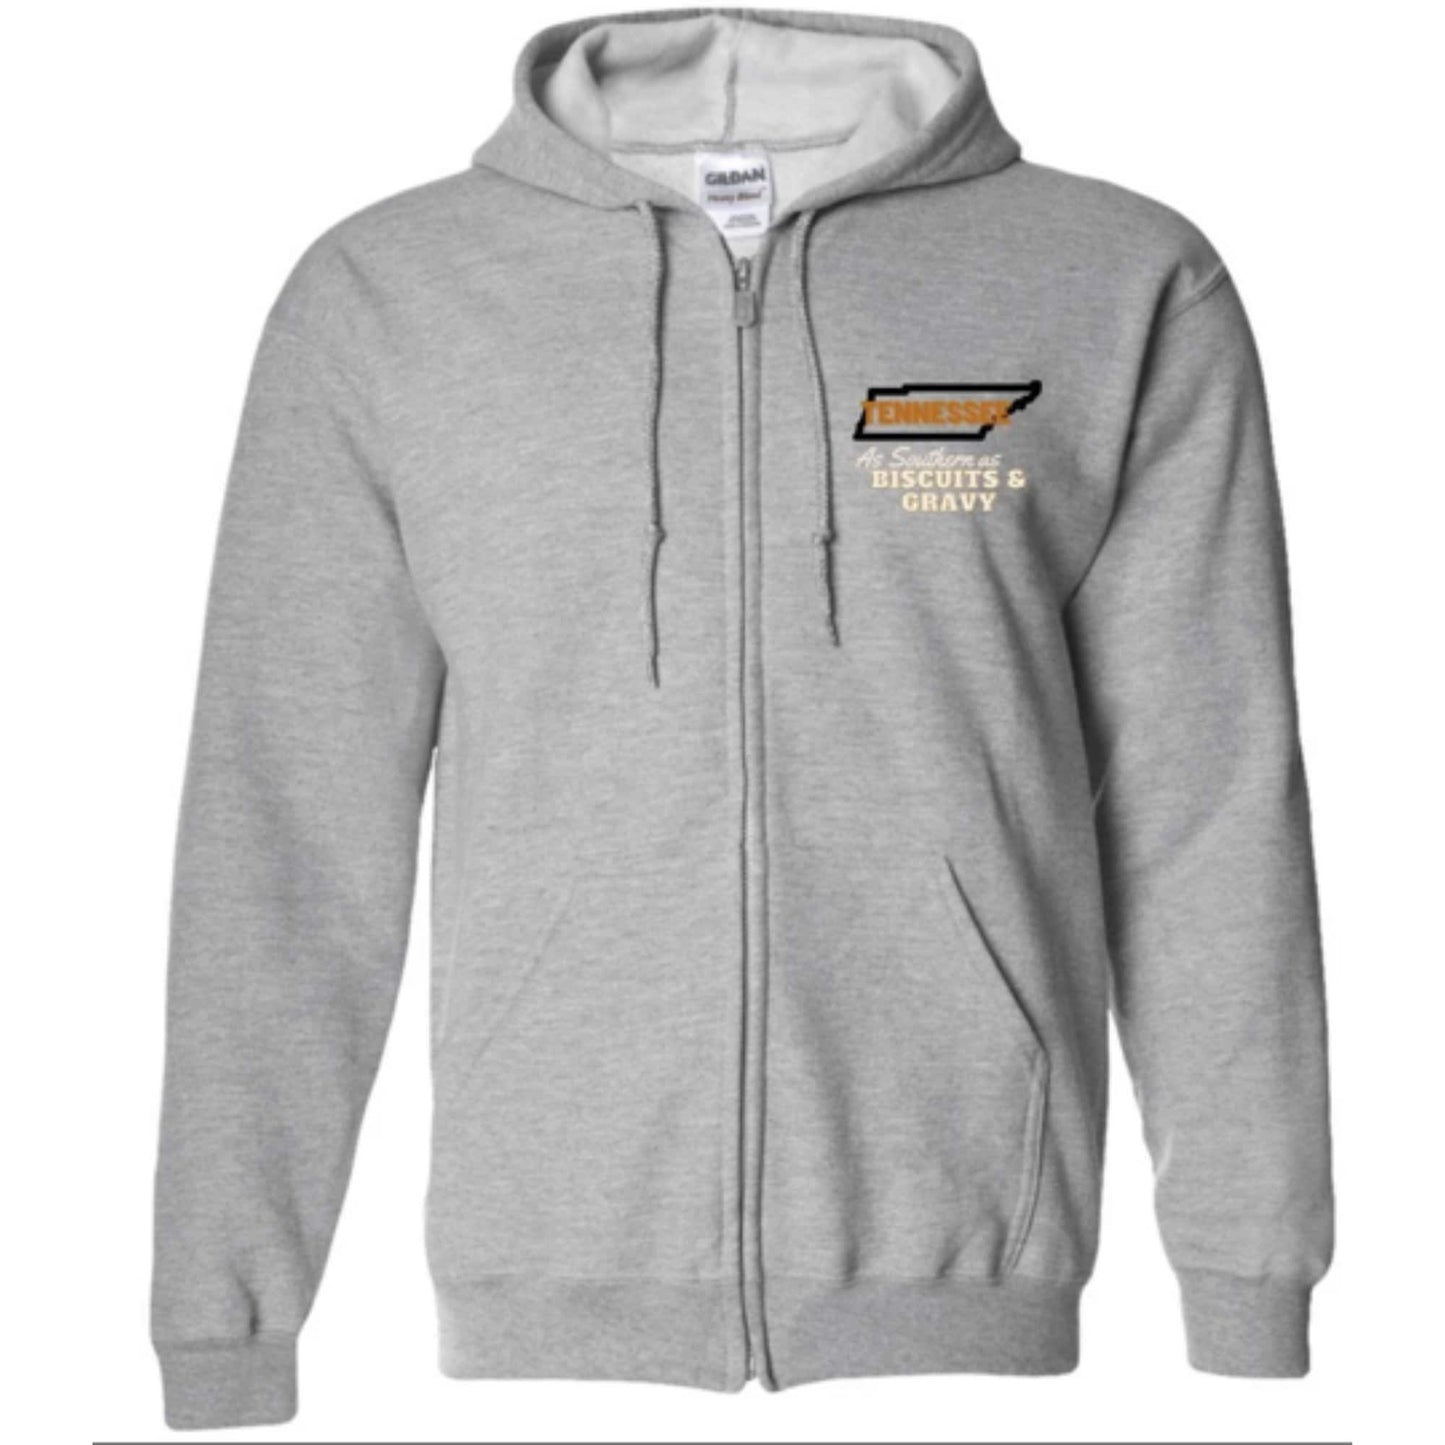 Tennessee Zip Up Hooded Sweatshirt | Tennessee Clothing | GIFTS FOR HIM or her